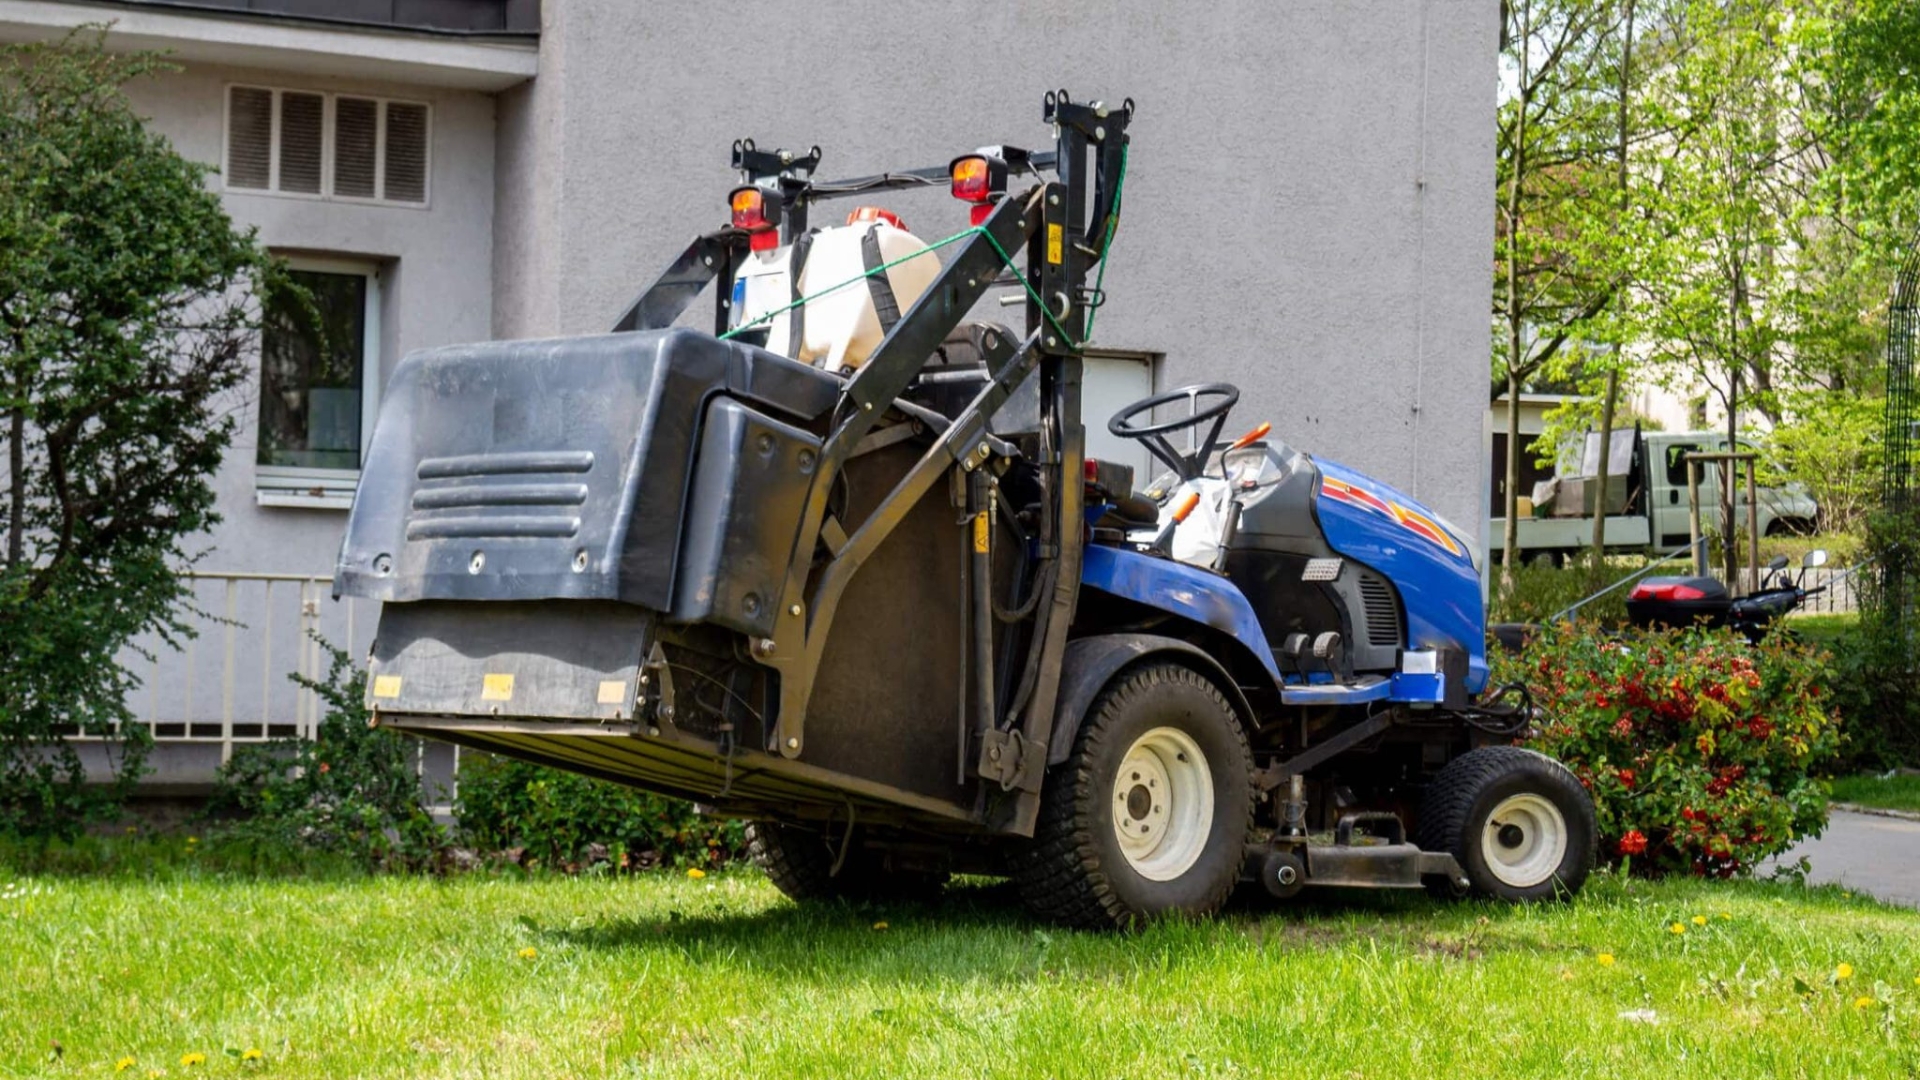 Lawn Tractor vs Garden Tractor: What’s The Difference